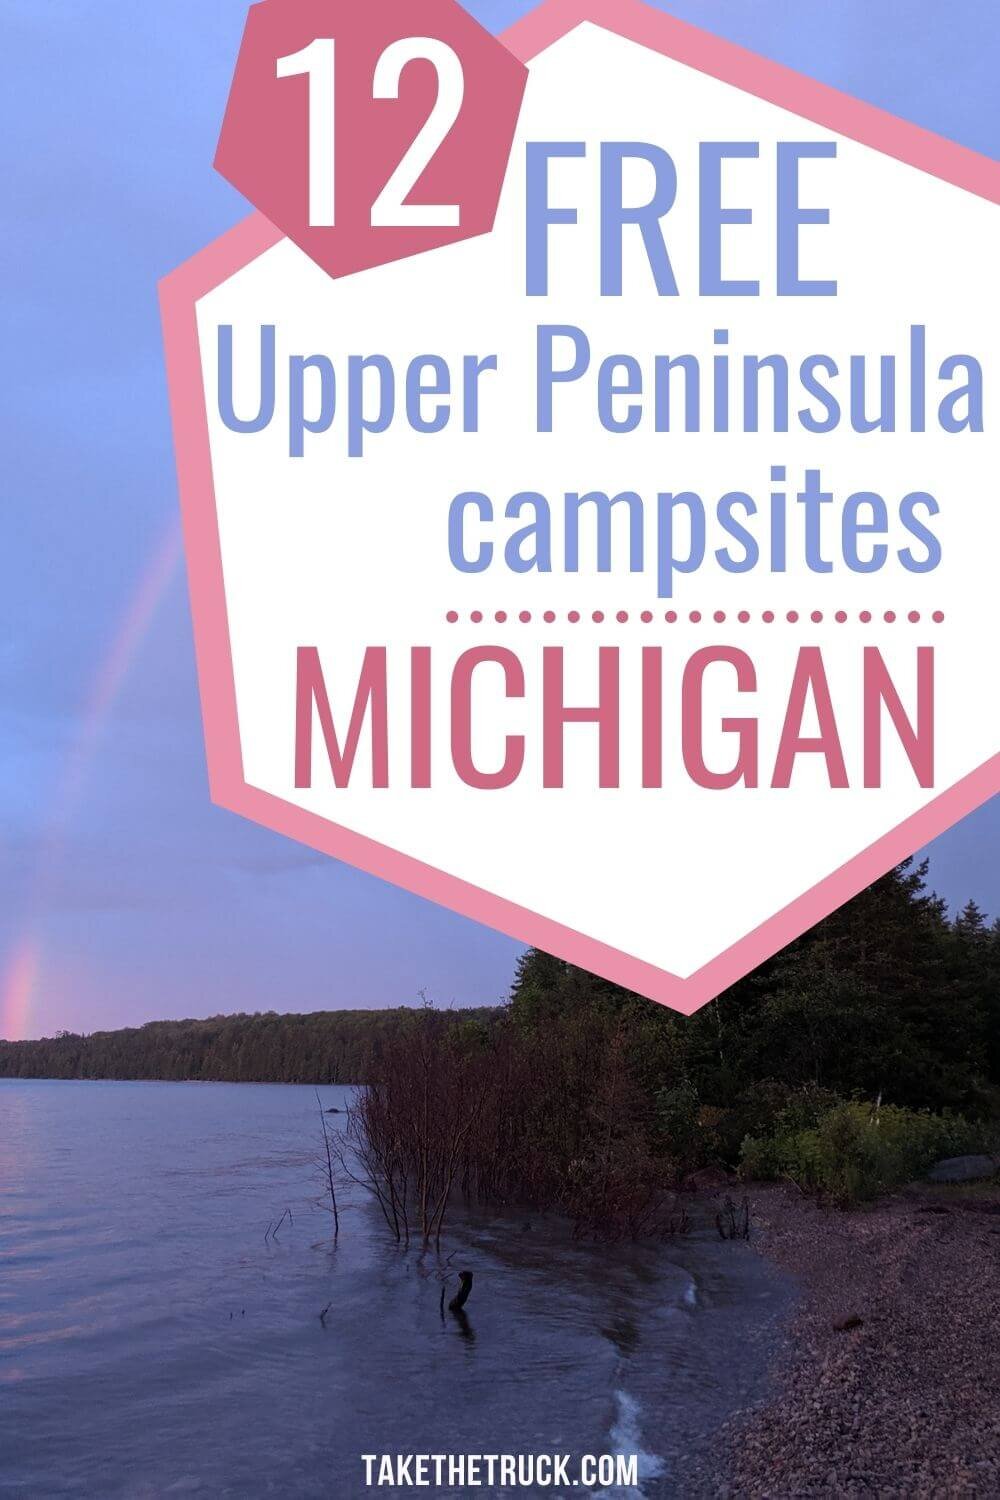 Check out these 12 free camping areas in Michigan’s Upper Peninsula if you’re planning a budget road trip around Michigan or an upper peninsula camping trip! Camp for free in the Upper Peninsula!